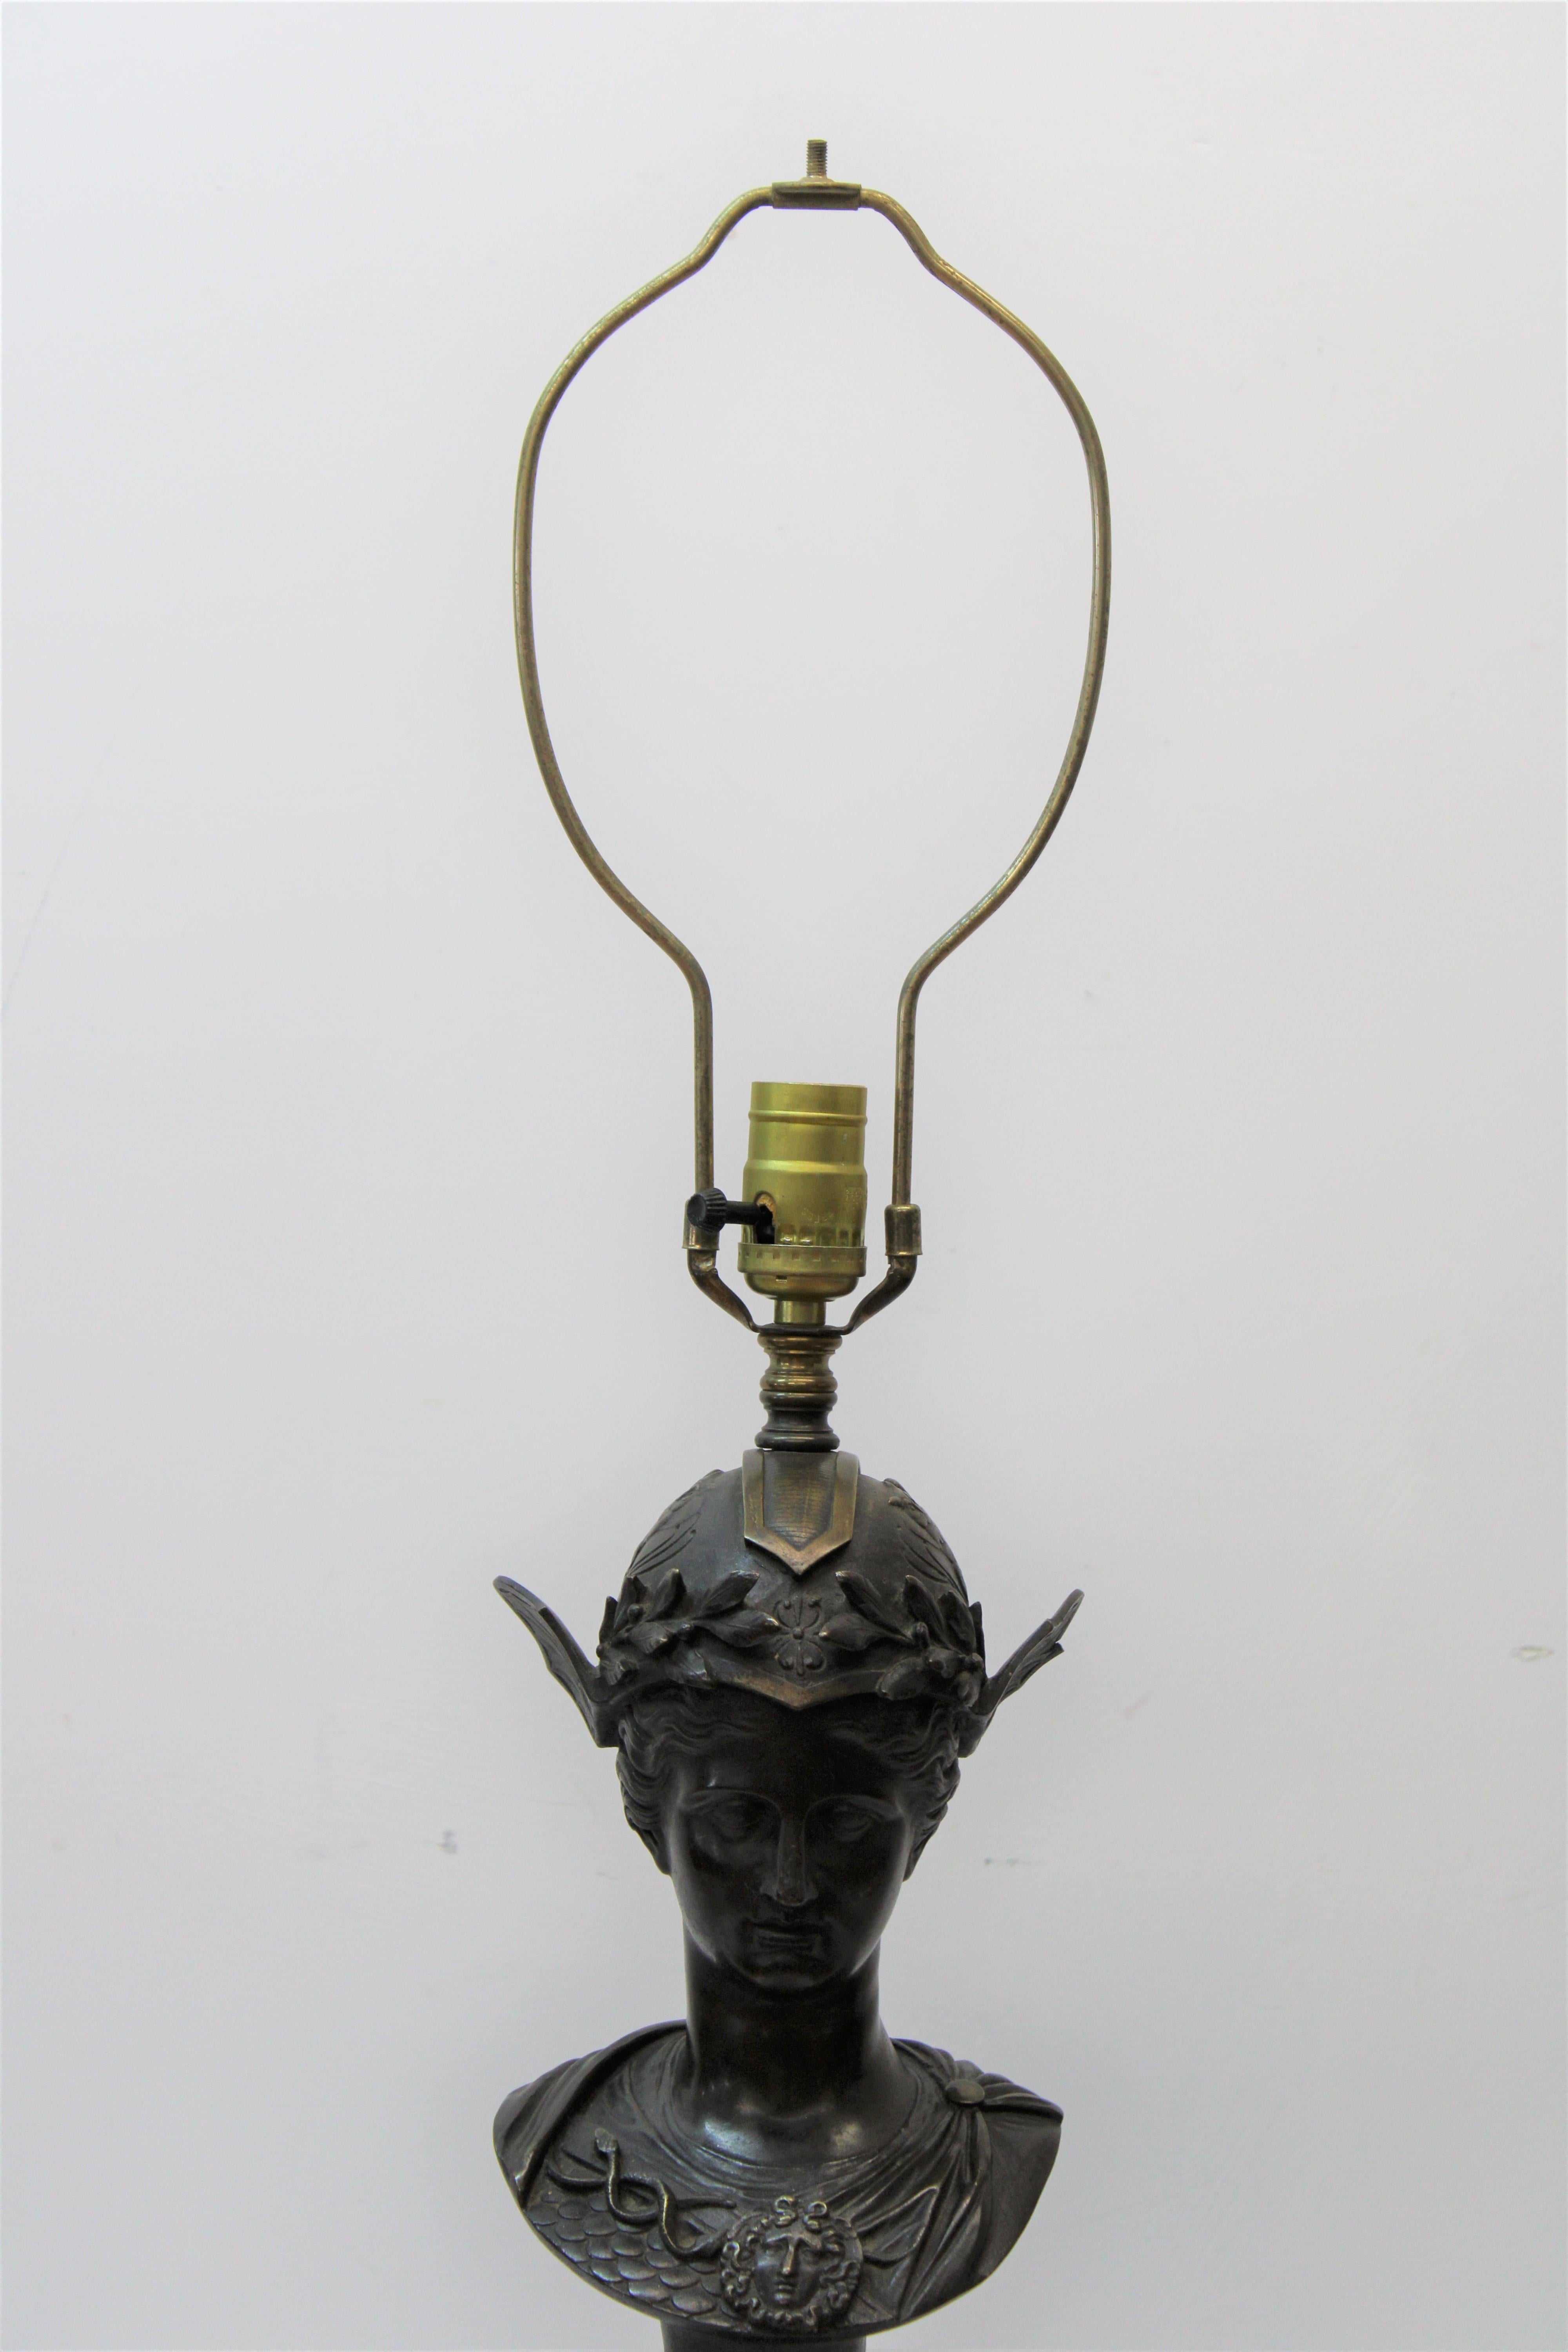 C. late 19th century - early 20th century

Bronze Roman goddess table lamp w/ marble & brass base.